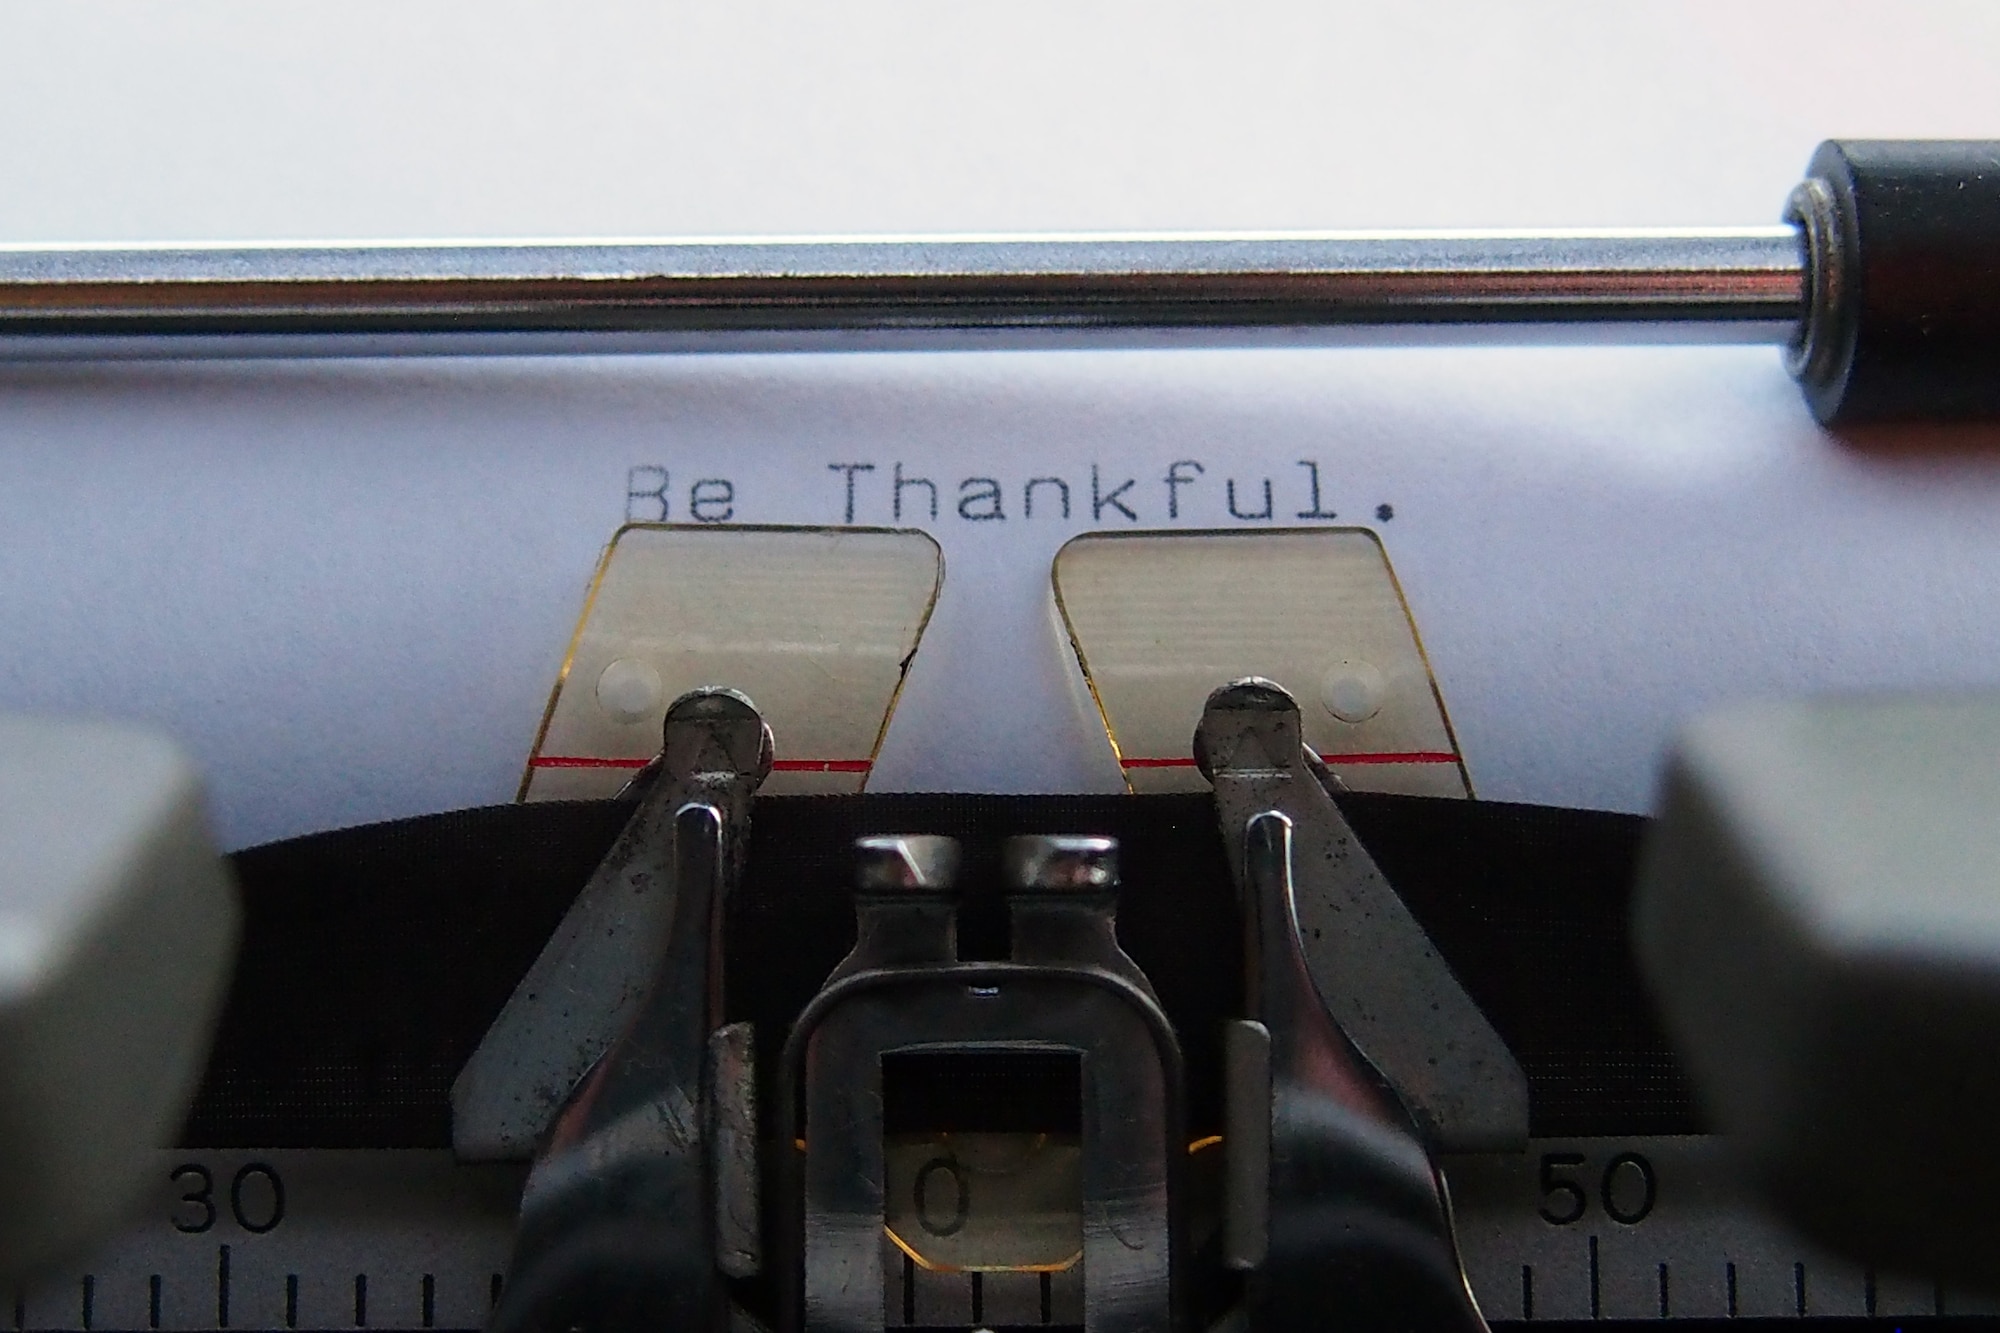 Thankfulness and gratitude are key ingredients of resiliency, according to a 2003 study published in the Journal of Personality and Social Psychology. (Air National Guard photo by Airman 1st Class Crystal Housman)